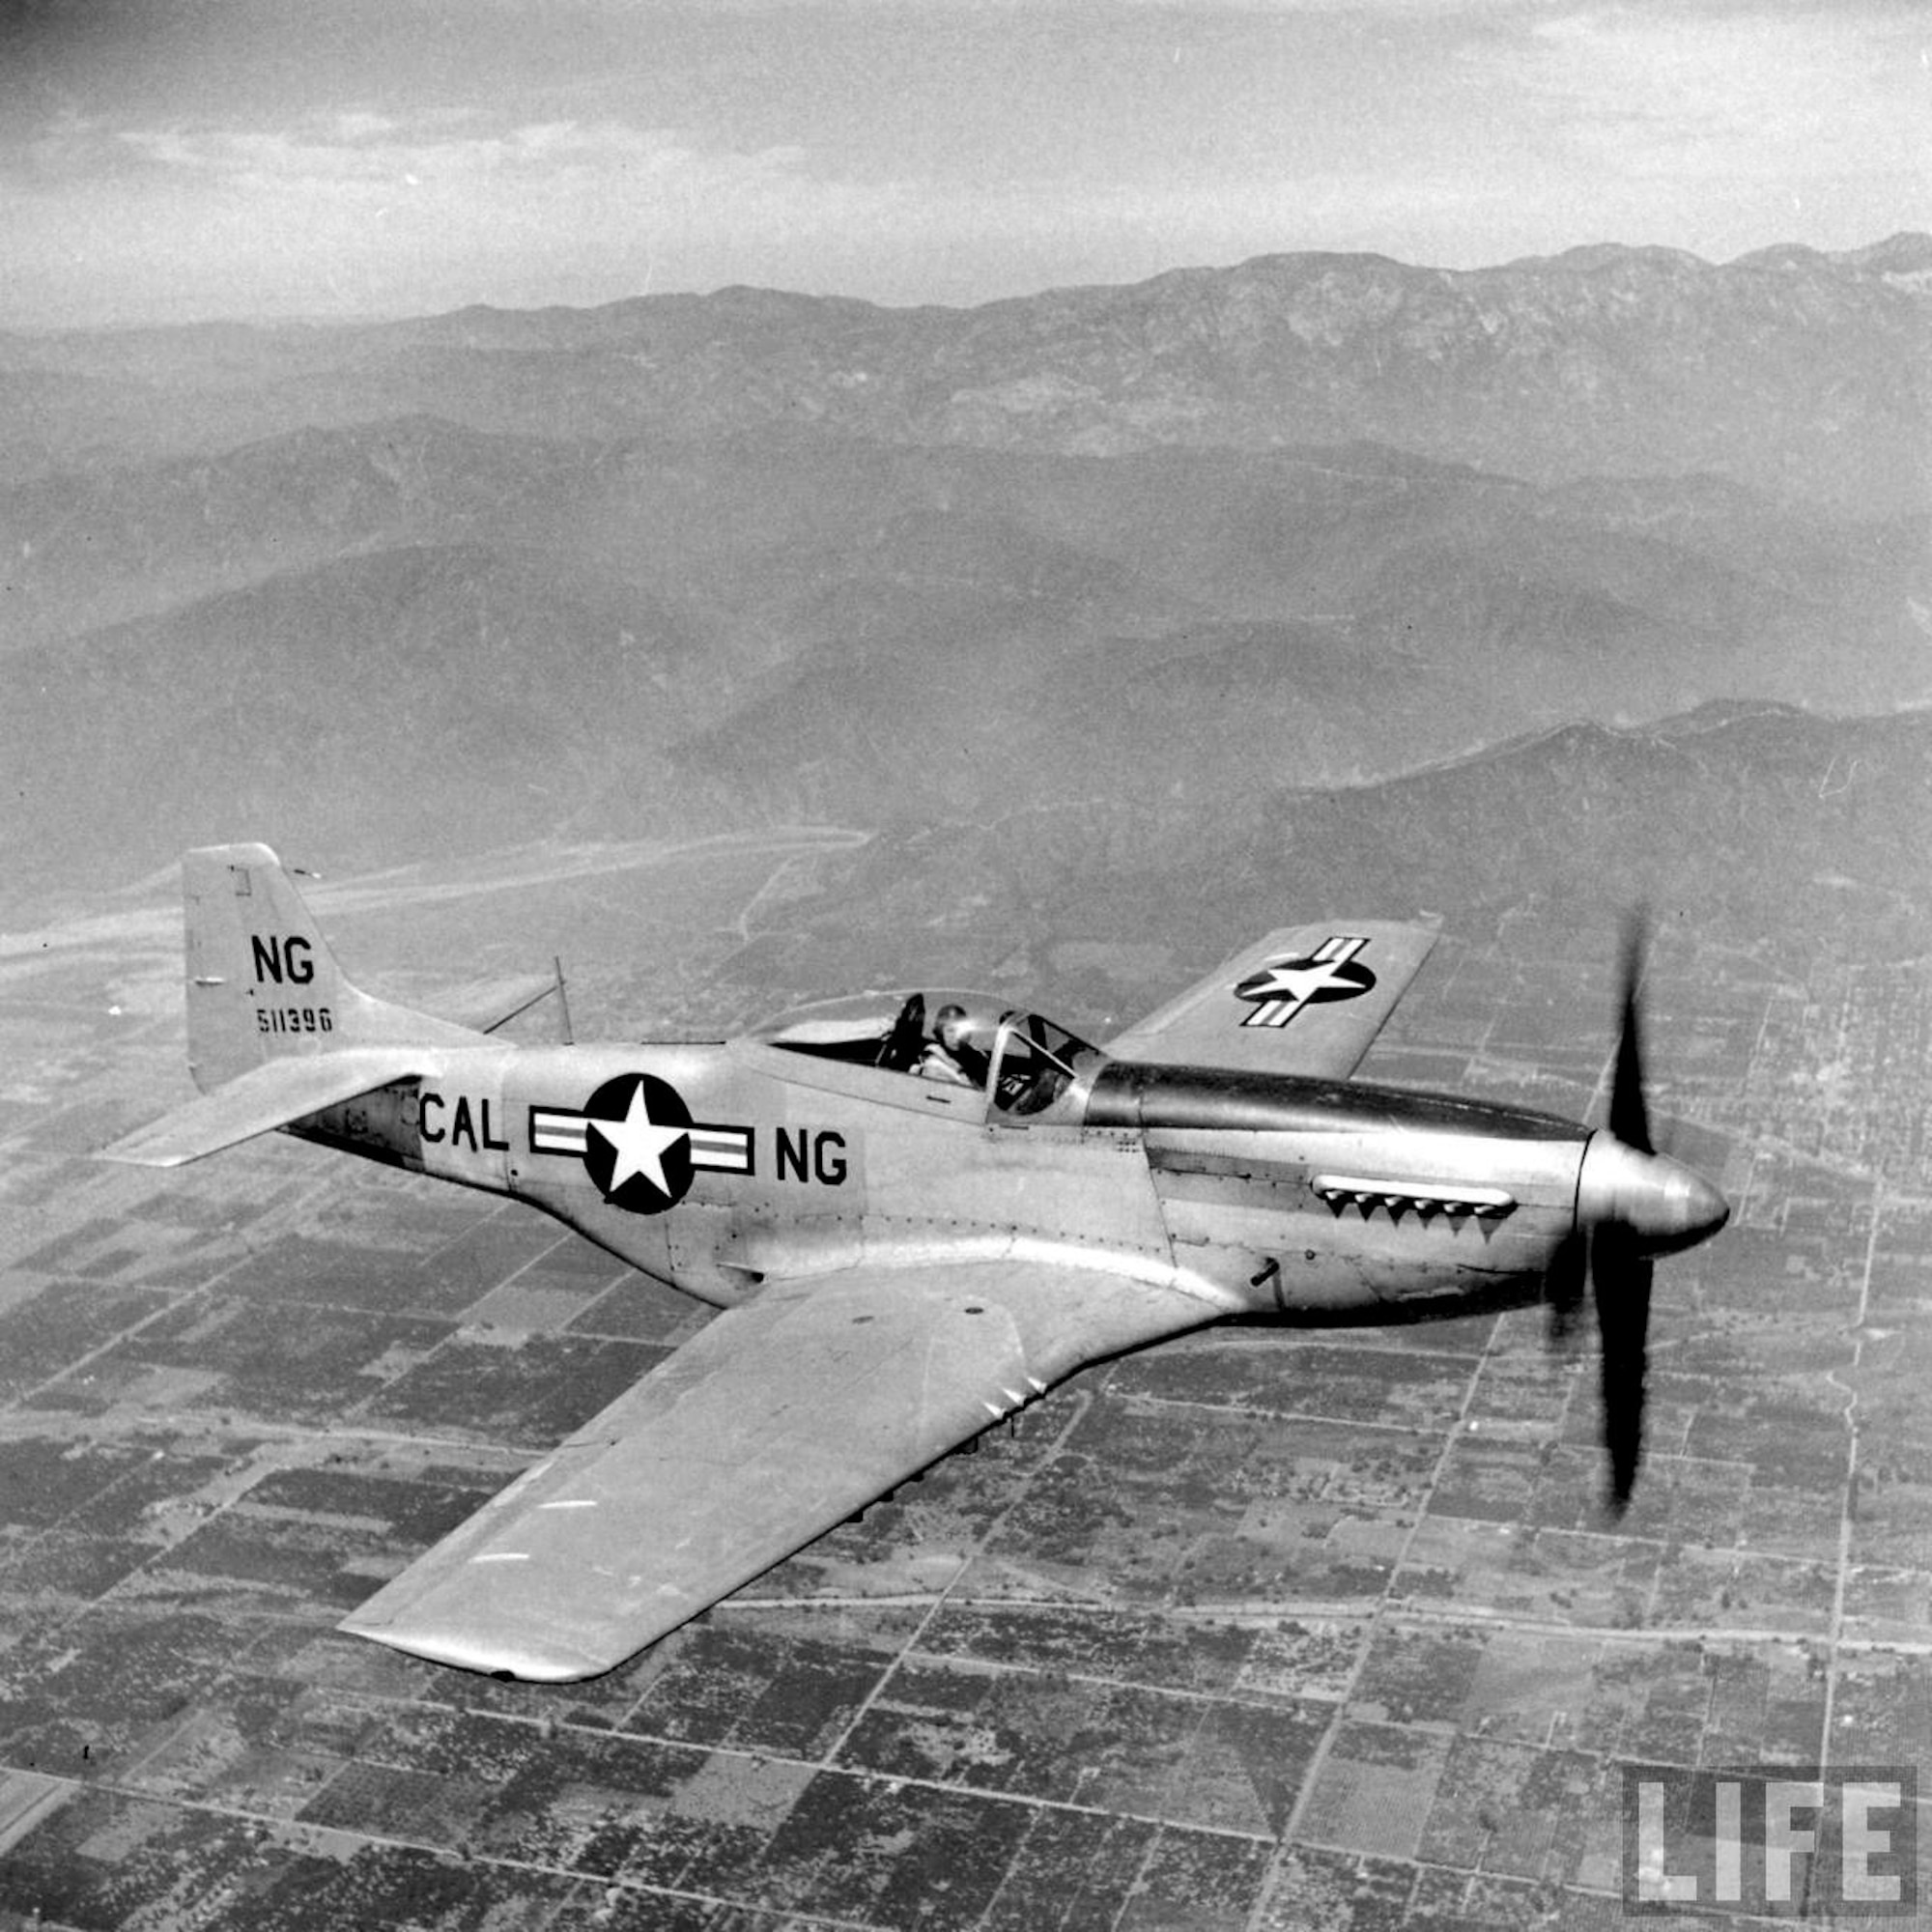 P-51 Mustang, 1952-53: The new fighter incorporated many of the latest developments in aeronautics, notably the laminar flow wing that was relatively symmetrical and offered less drag at high speed. While the Korean War is thought of as a jet war, the Mustang played a key role in ground attack. P-51s flew over 60,000 missions in the Korean War, and were credited with destroying 12 enemy aircraft. 